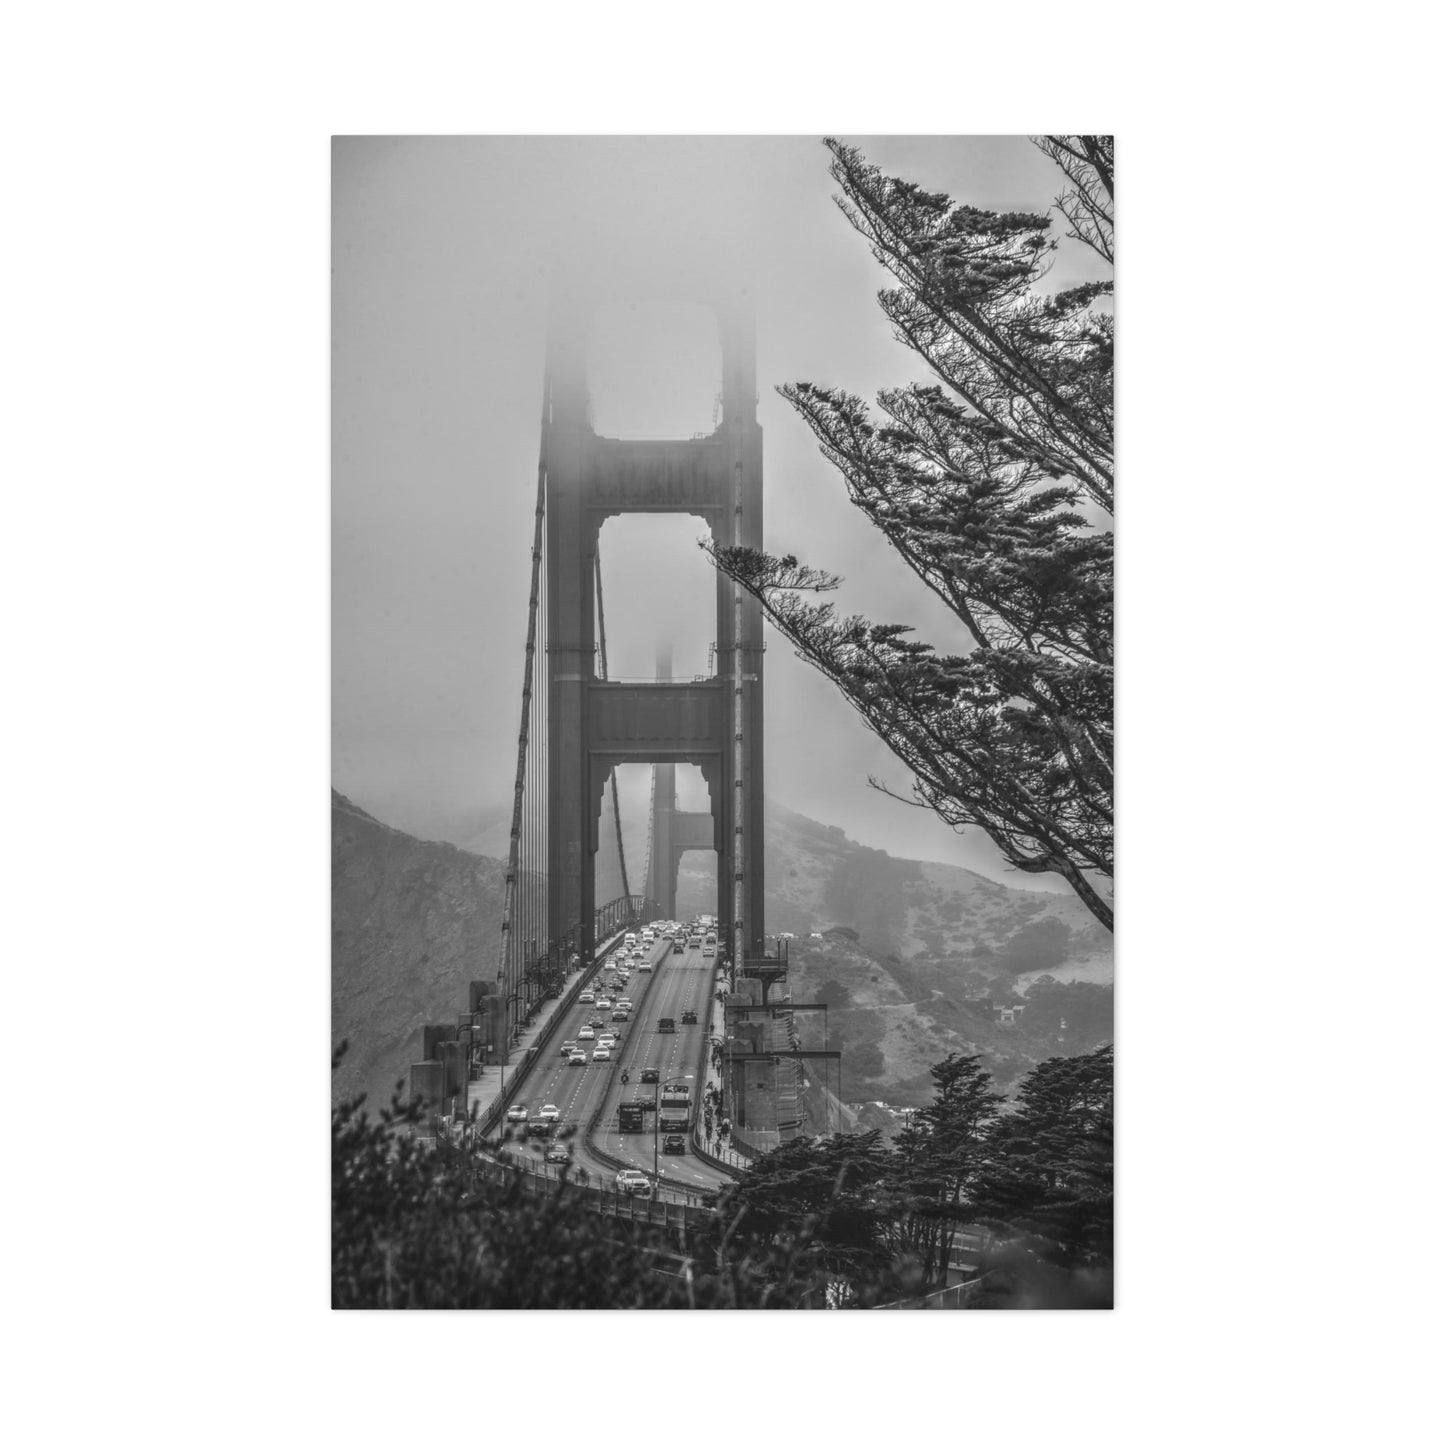 Canvas Print Of Golden Gate Bridge And Foliage In San Francisco For Wall Art